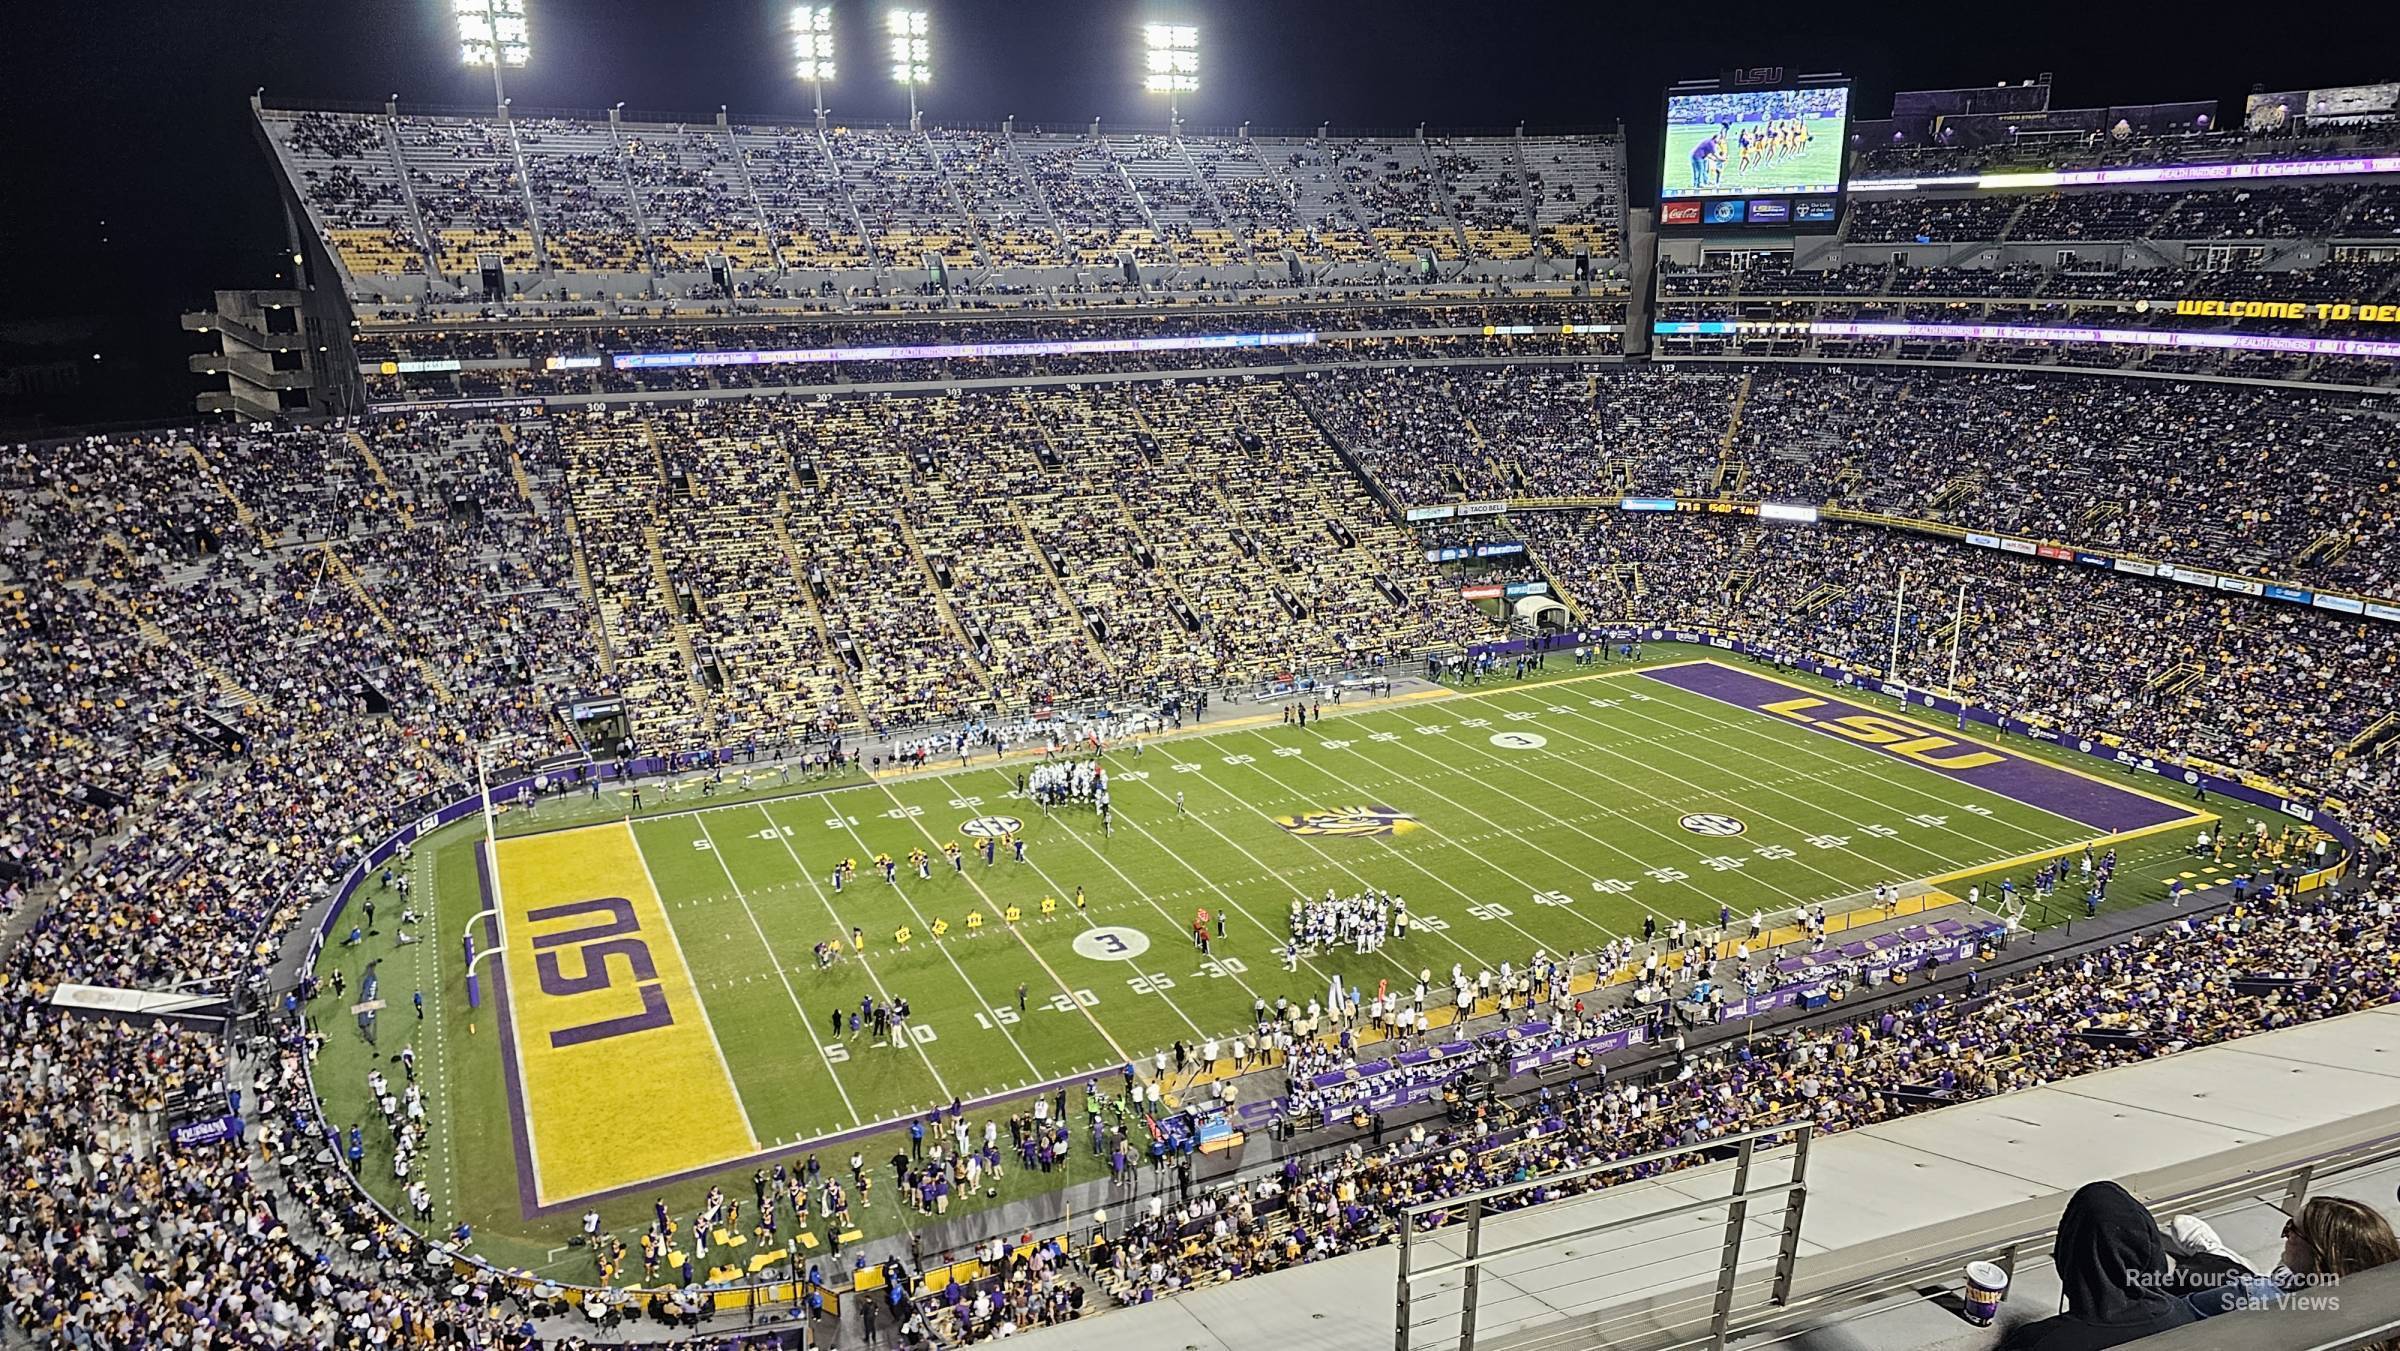 section 520, row 4 seat view  - tiger stadium